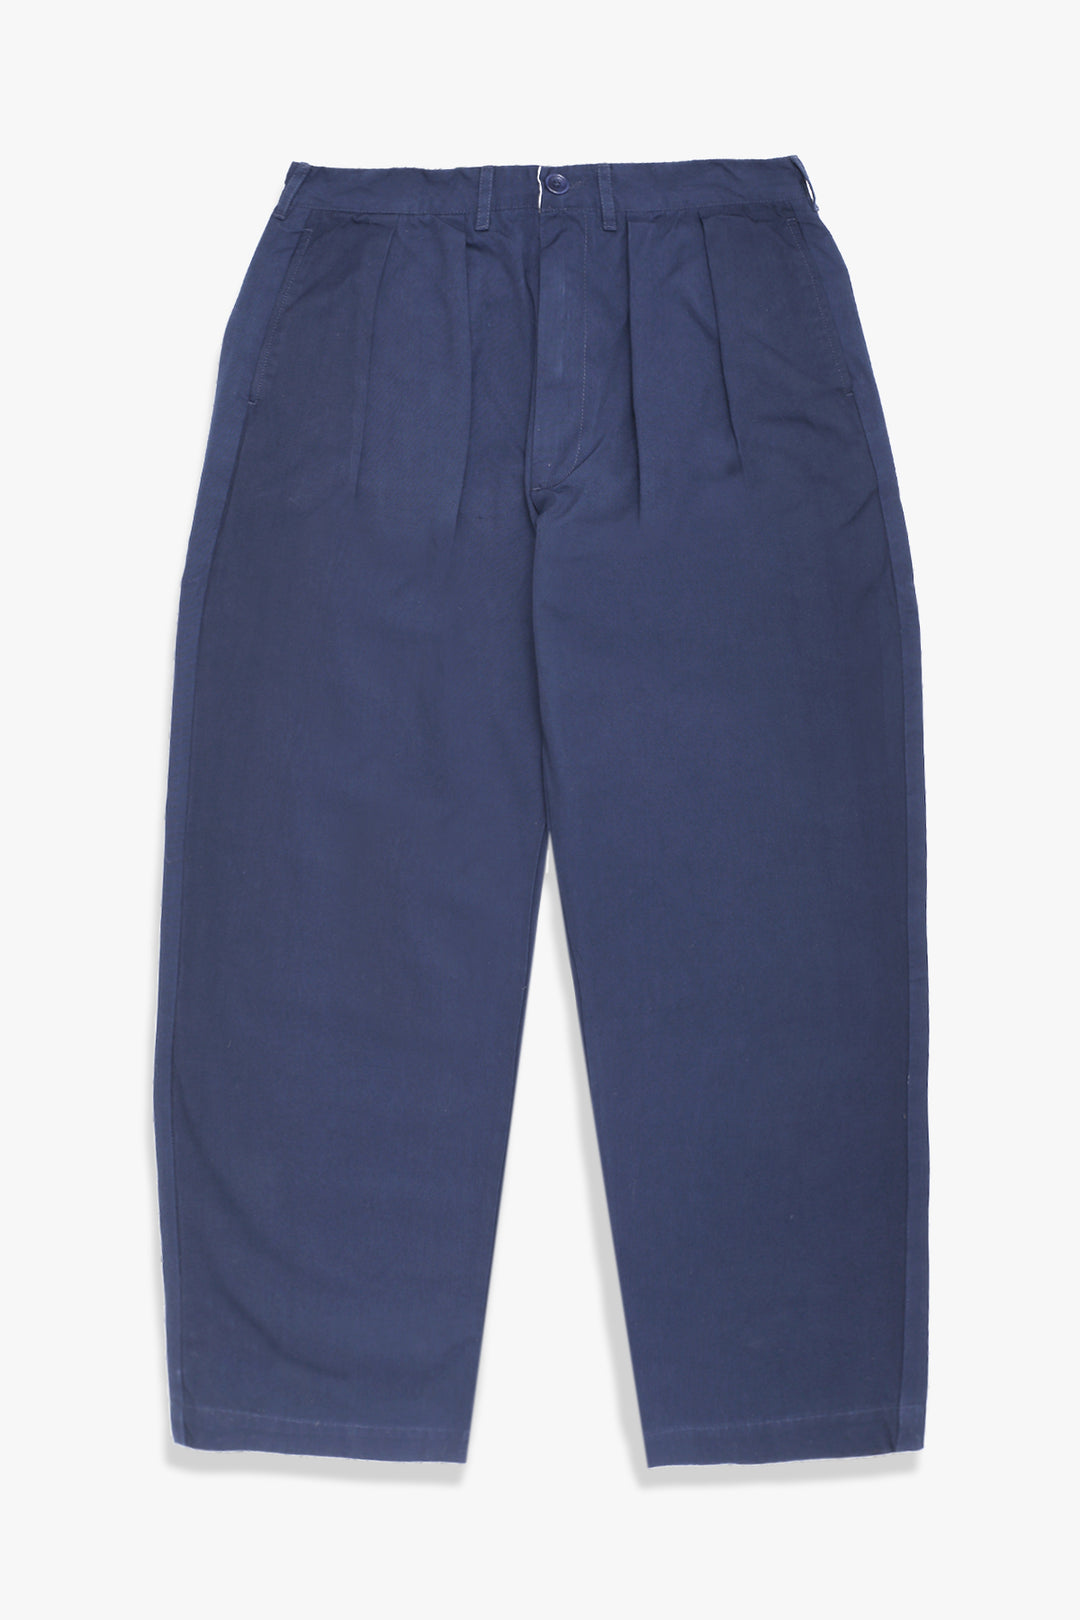 Service Works - Twill Part Timer Pant - Navy